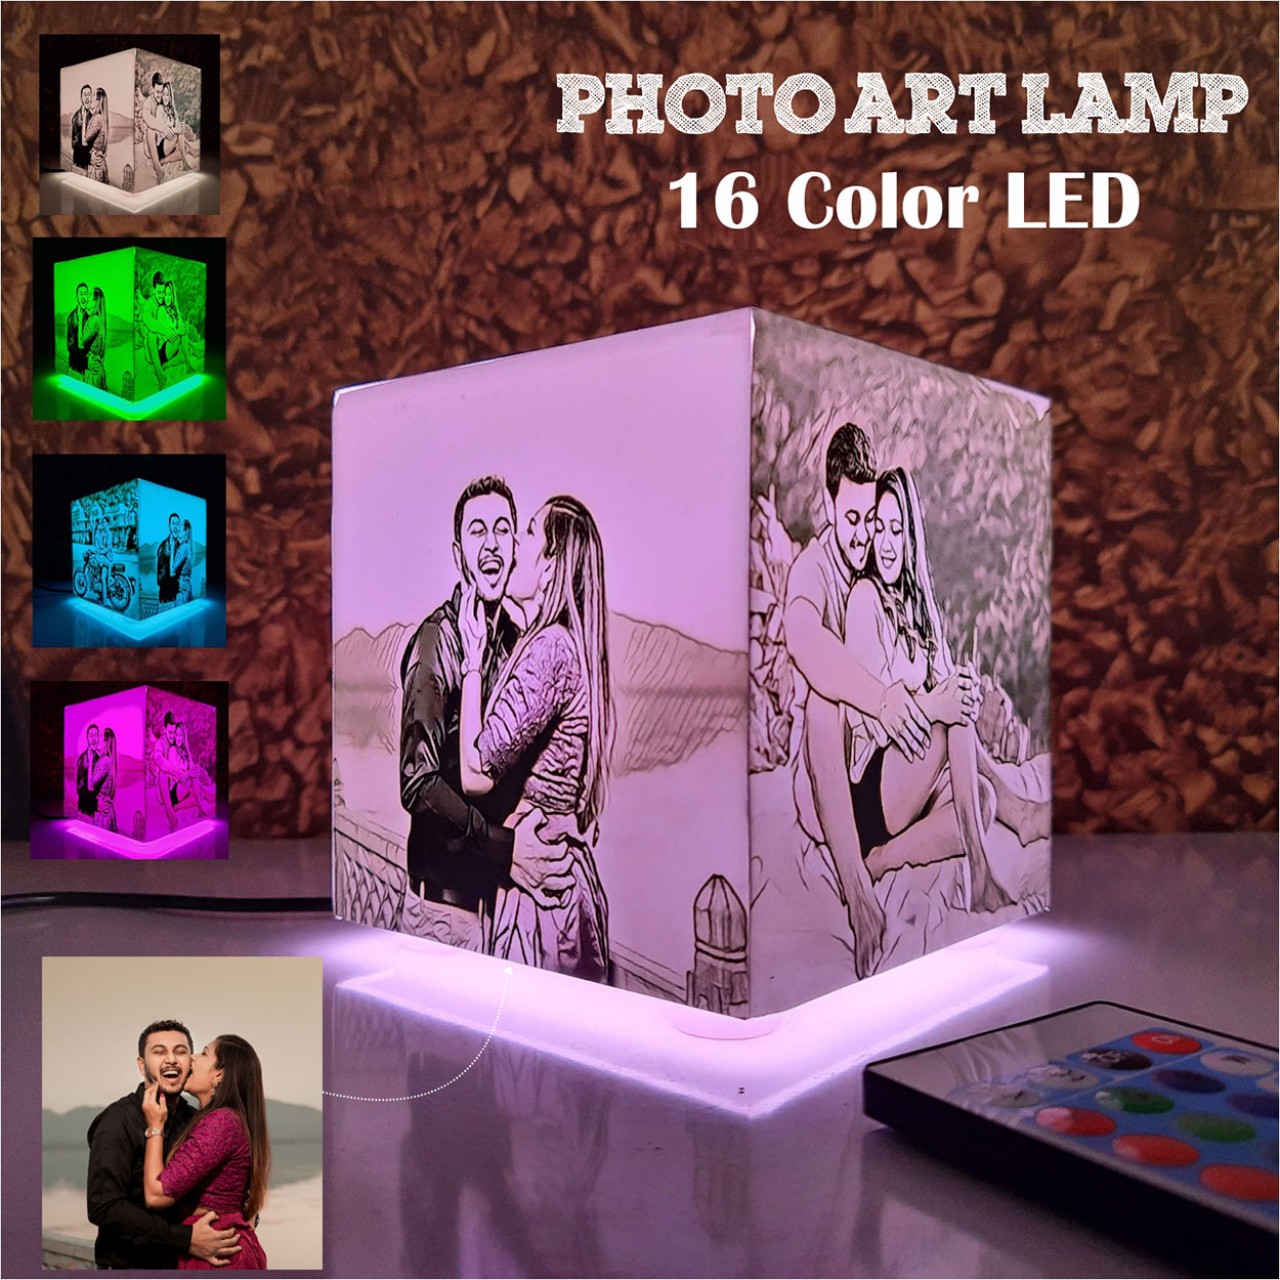 Personalized Colors Of Love Photo Art Lamp